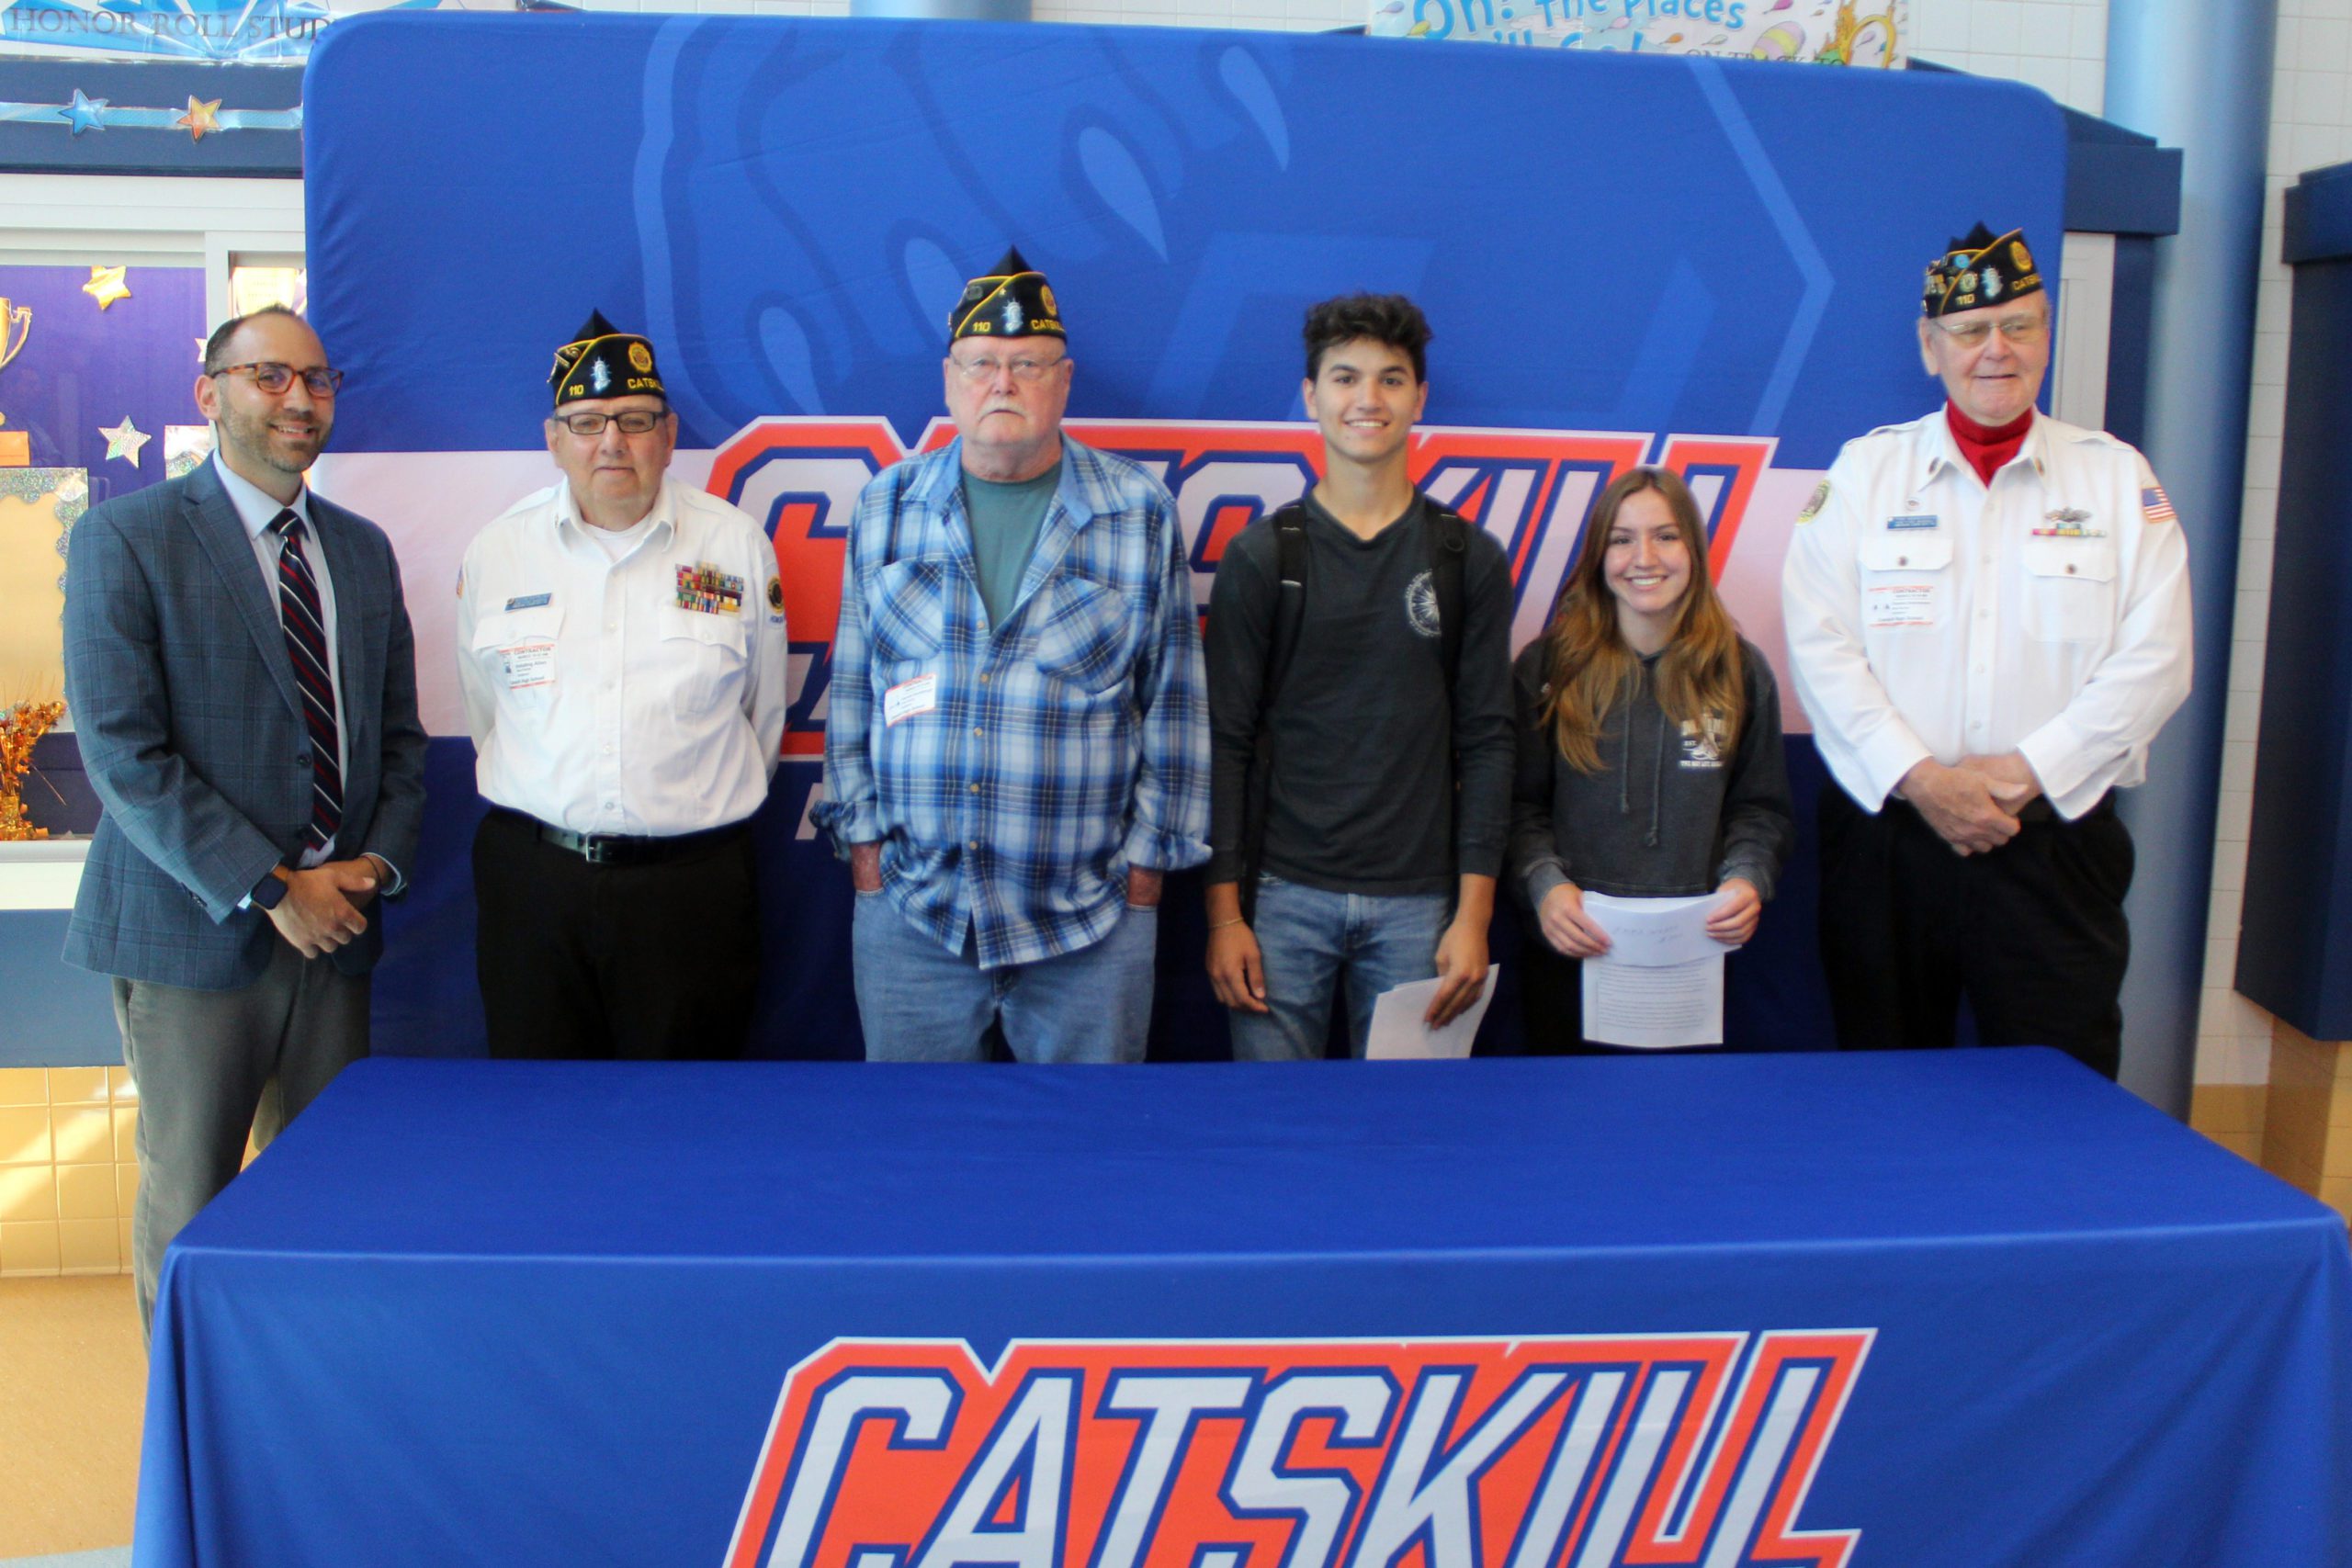 CHS principal, American Legion members, and student pose for photo in front of Catskill banner 